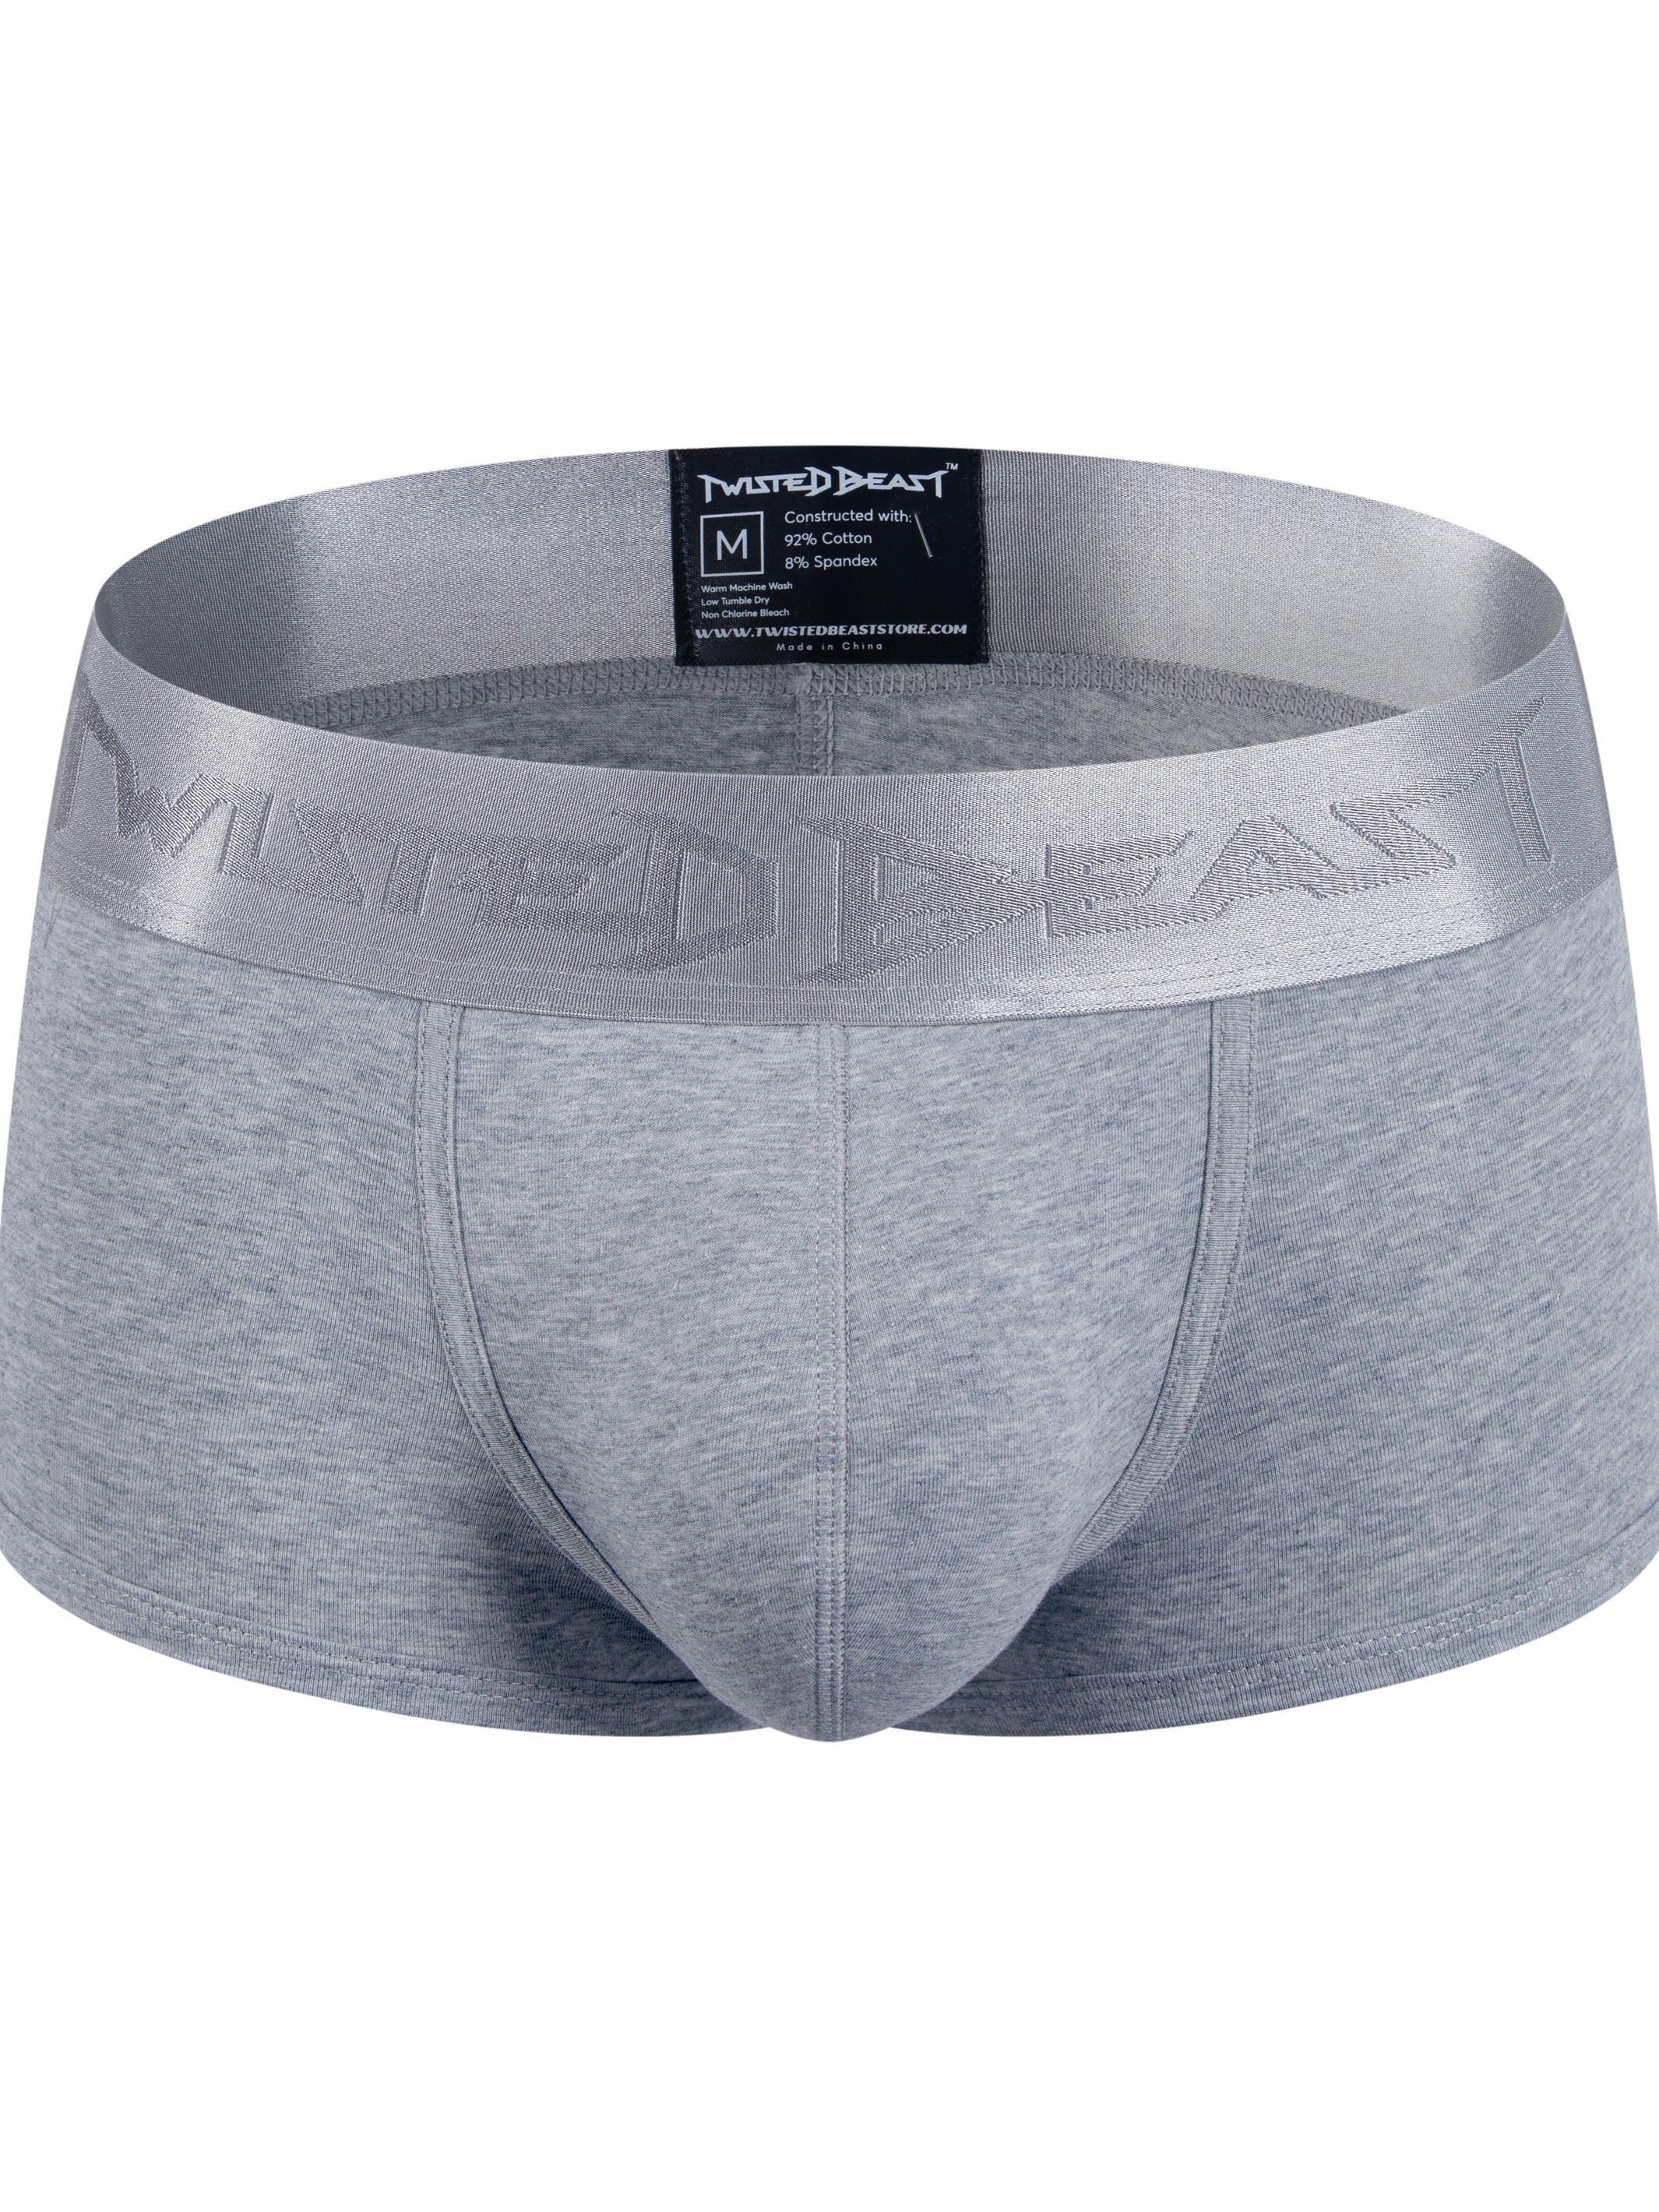 A frontal product photo of some grey Phantom Boxers.